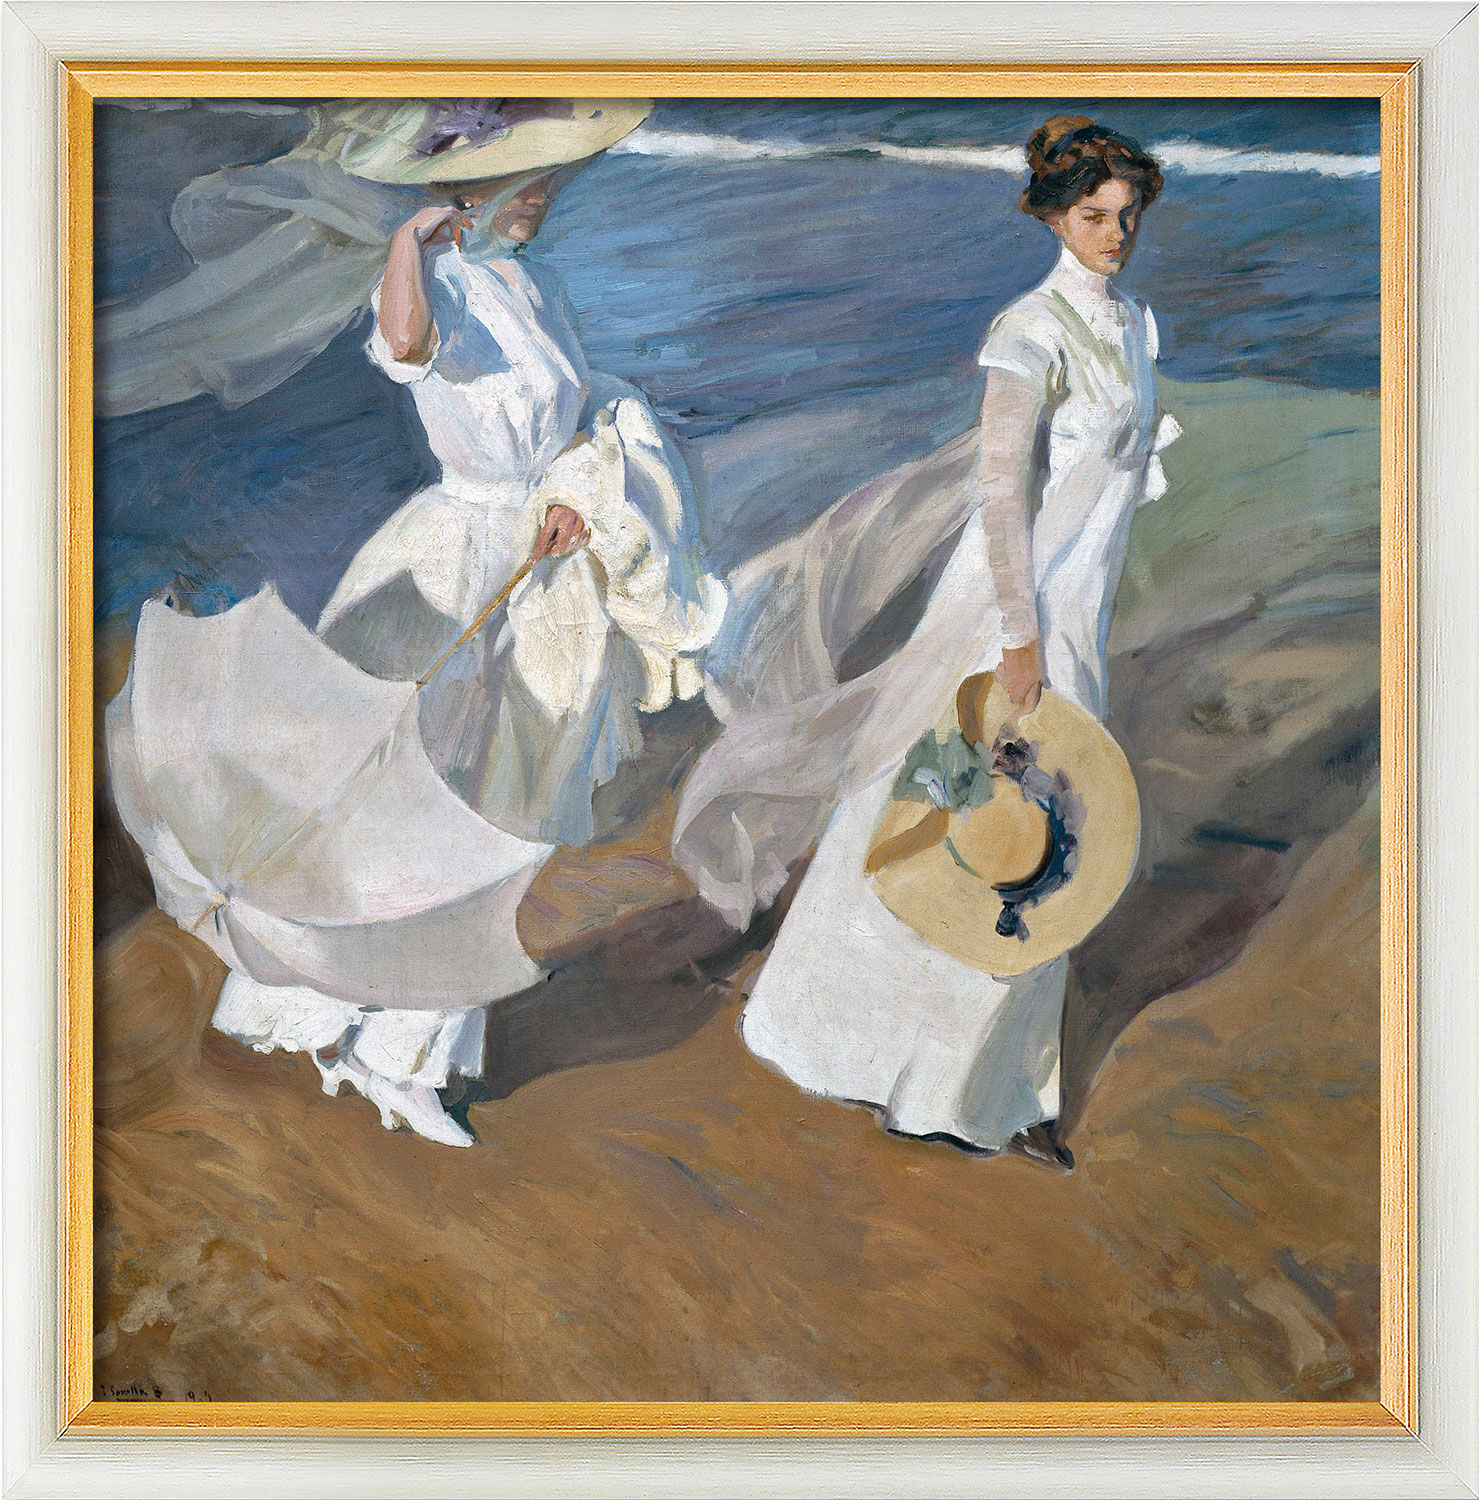 Picture "Walk on the Beach" (1909), white and golden framed version by Joaquín Sorolla y Bastida